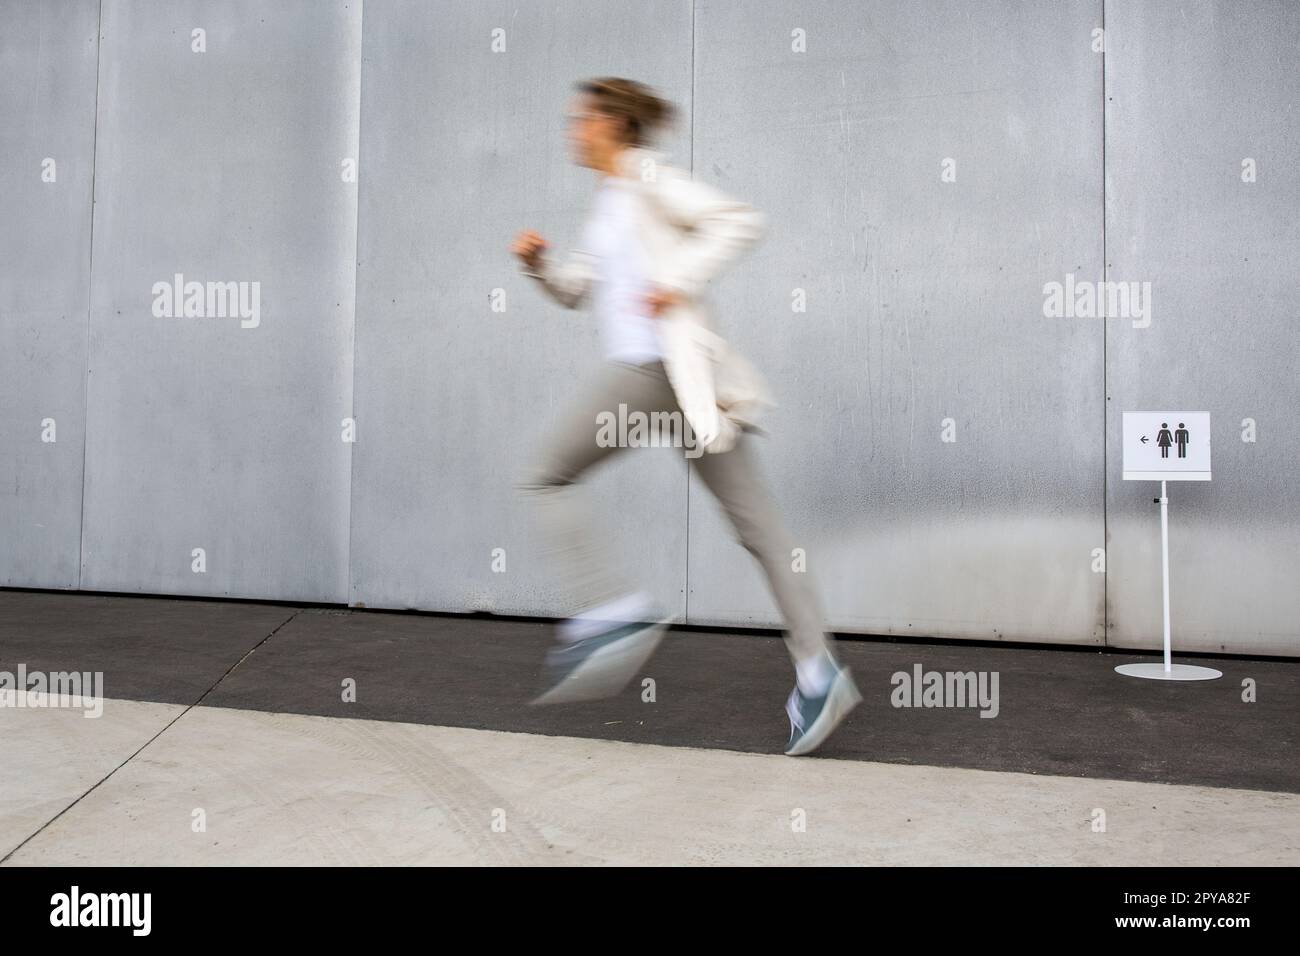 Woman rushing to a bathroom, toilet, hygiene, restroom. WC urgency concept. Stock Photo